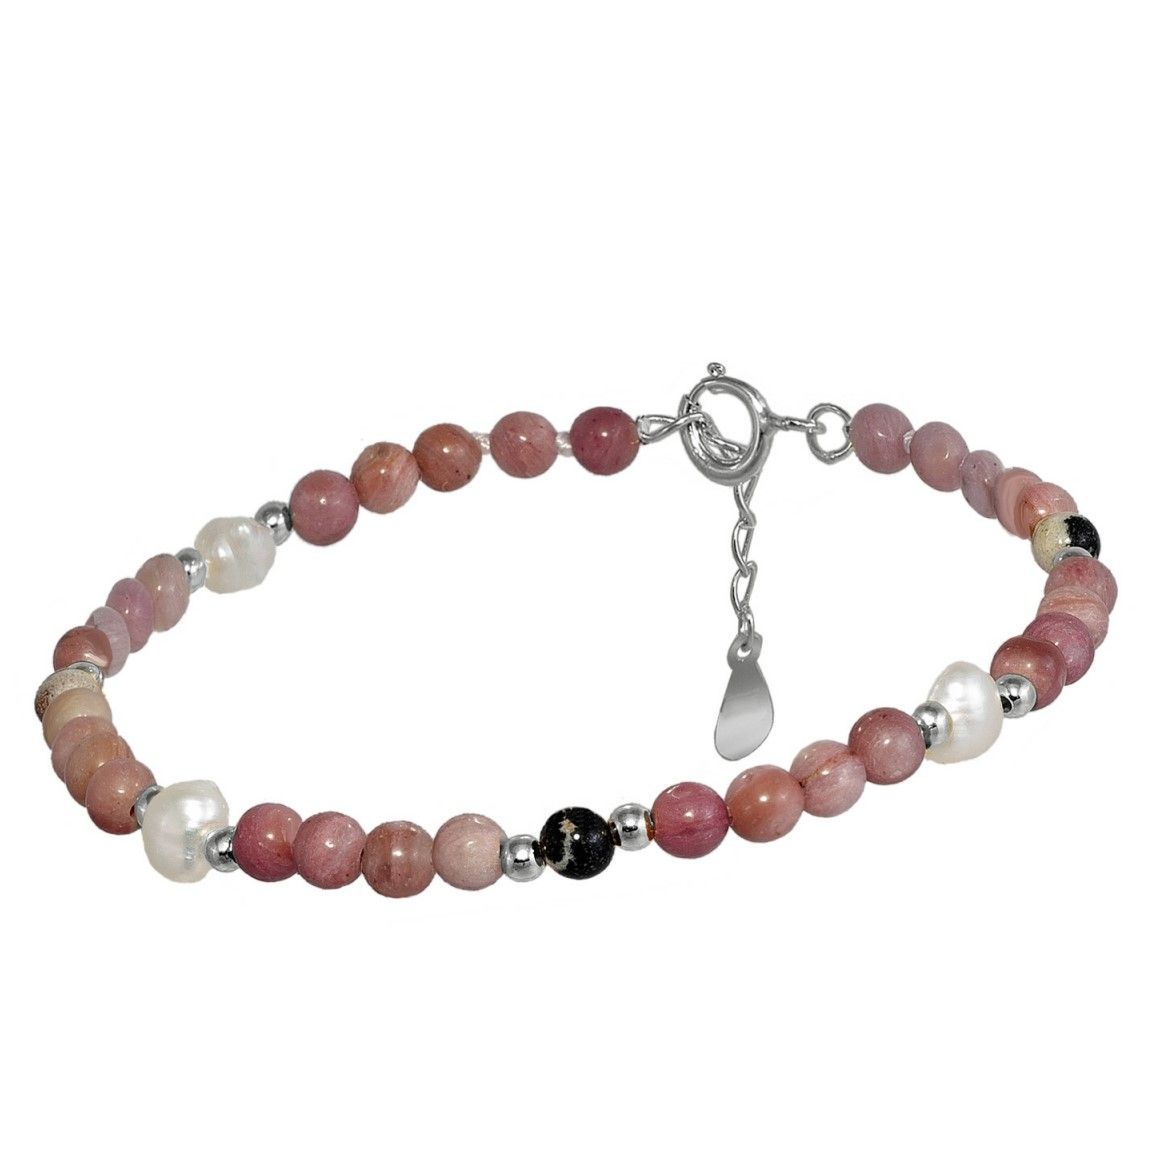 SILVER ANKLET WITH PINK STONES AND PEARLS